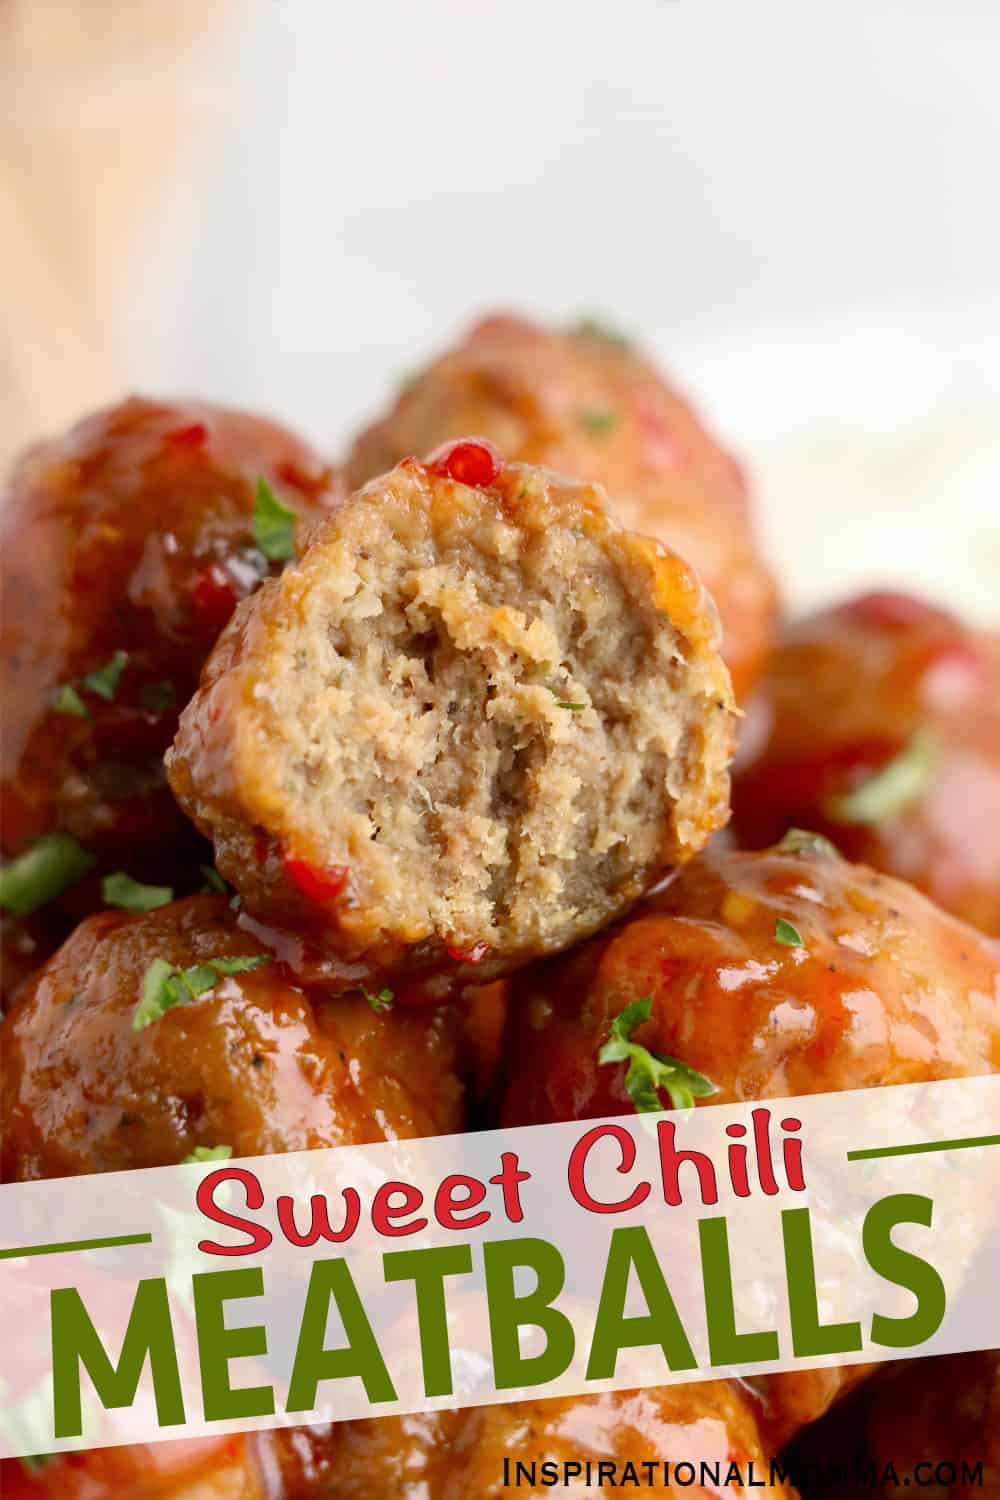 Sweet Chili Meatballs are perfect party appetizers. With only 4 ingredients, they are packed with flavor, simple to make, and easy to enjoy!